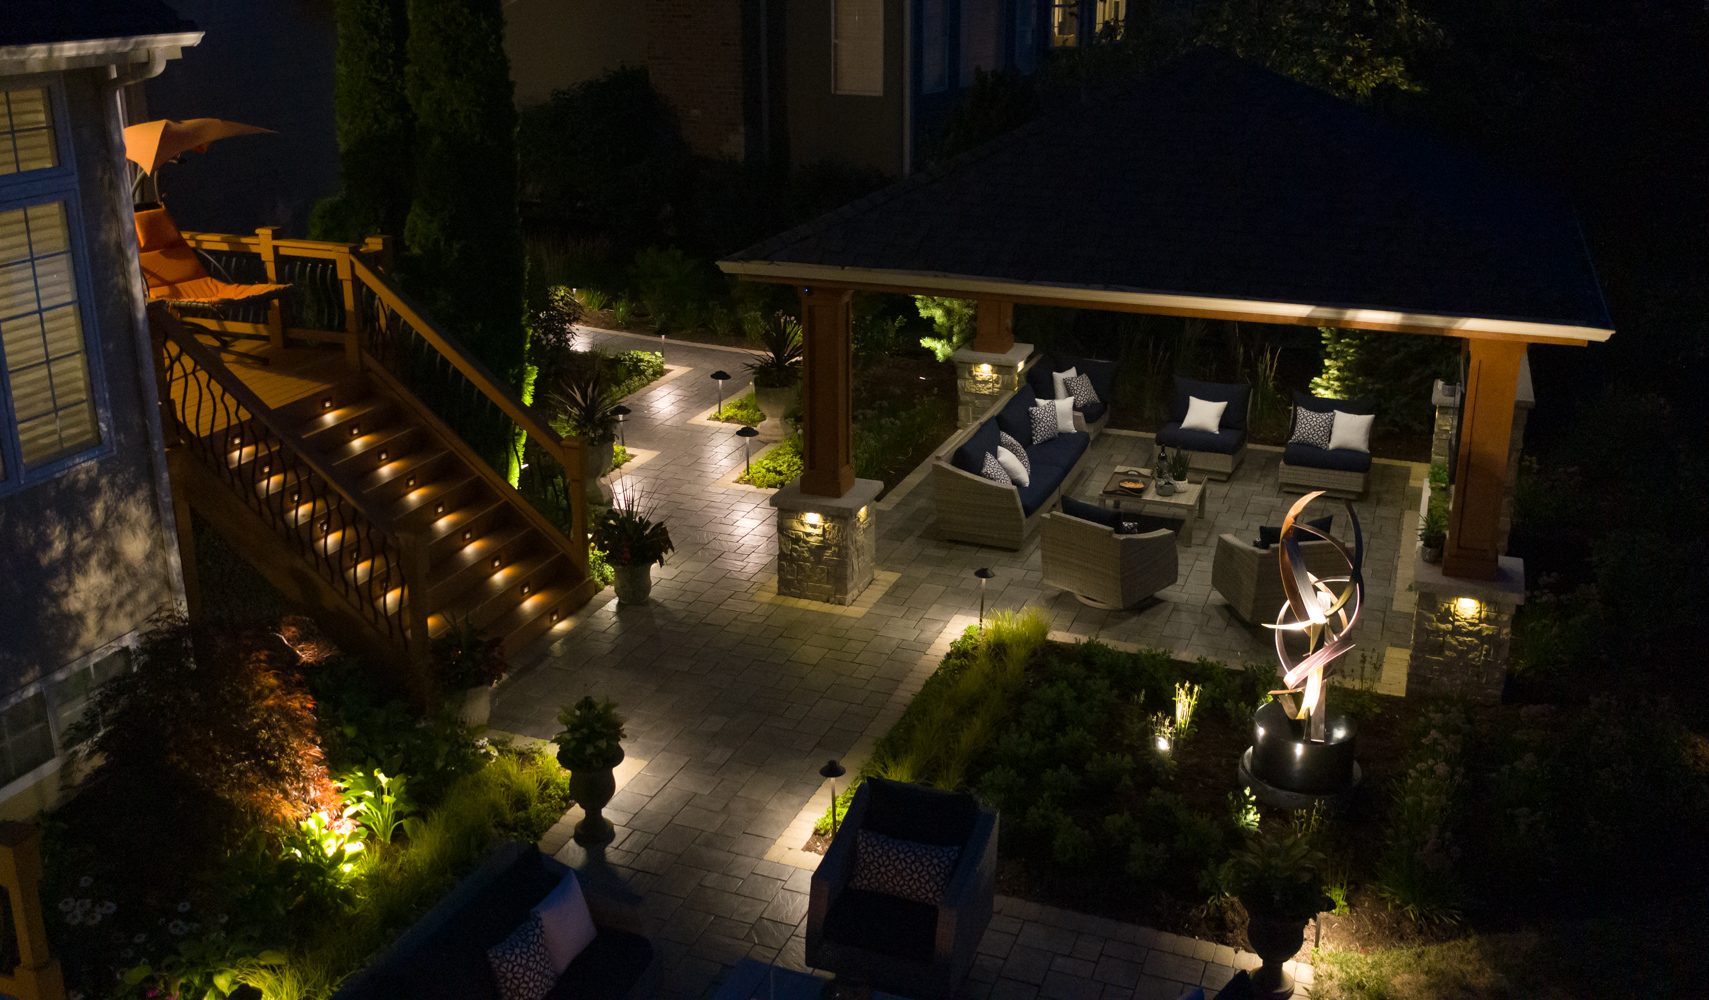 patio deck lighting ideas with stair